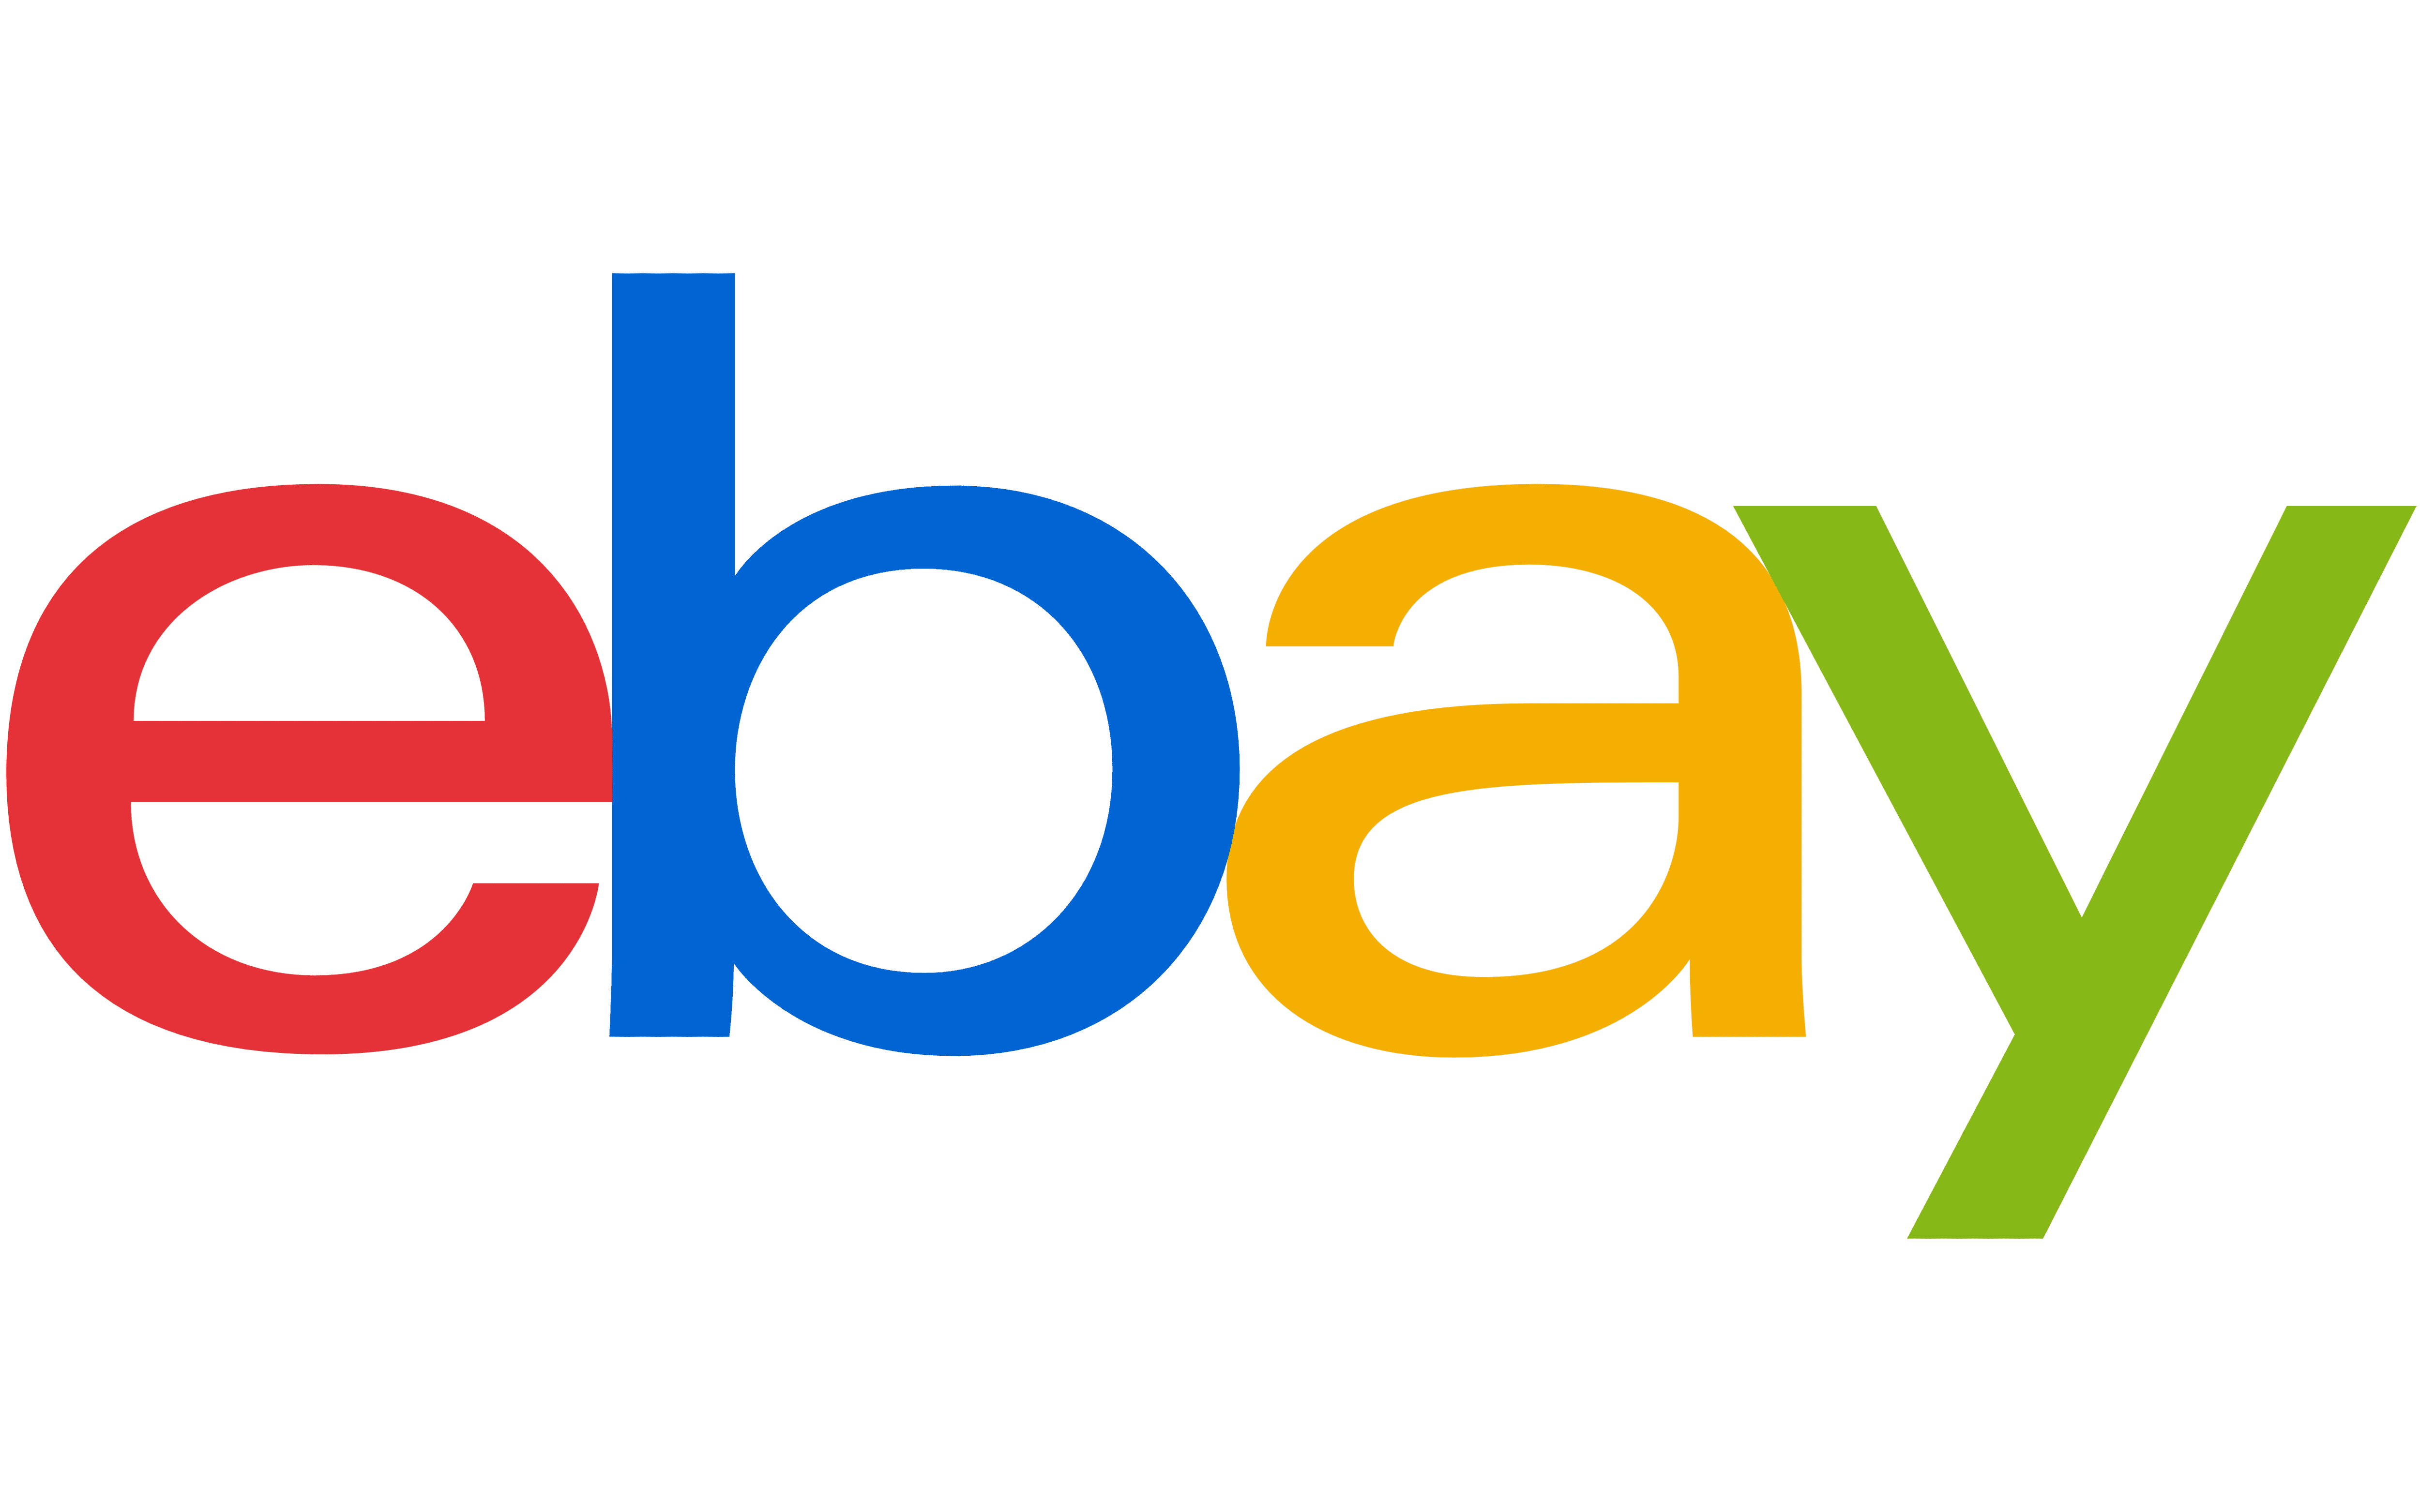 A green background with the word ebay in colorful letters.